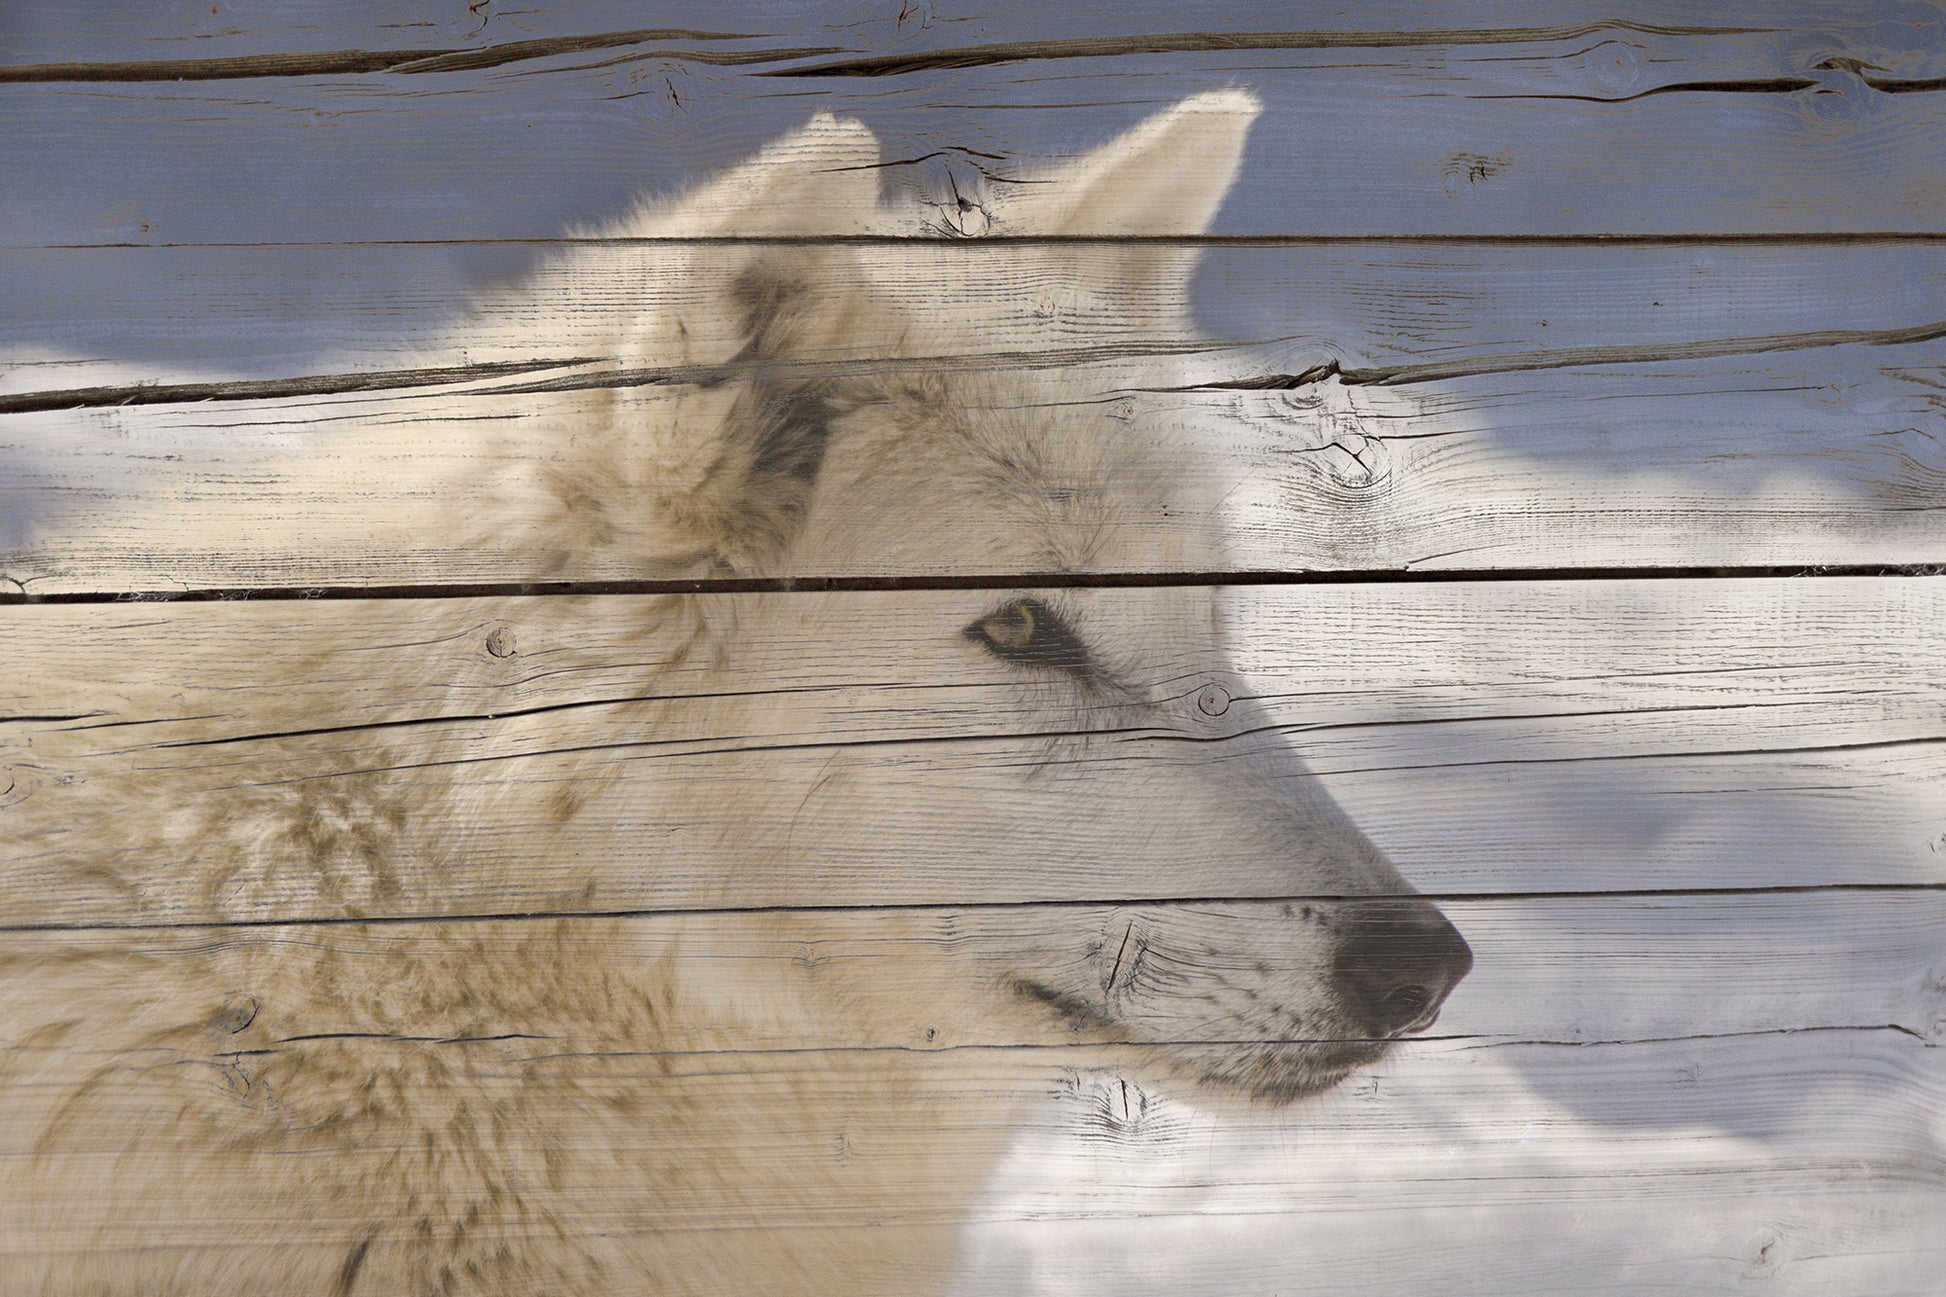 Rustic Canvas Pictures: Aries the White Wolf Portrait on Faux Weathered Wood Texture - Wildlife / Animal / Nature Photograph Canvas Wall Art Print - Artwork